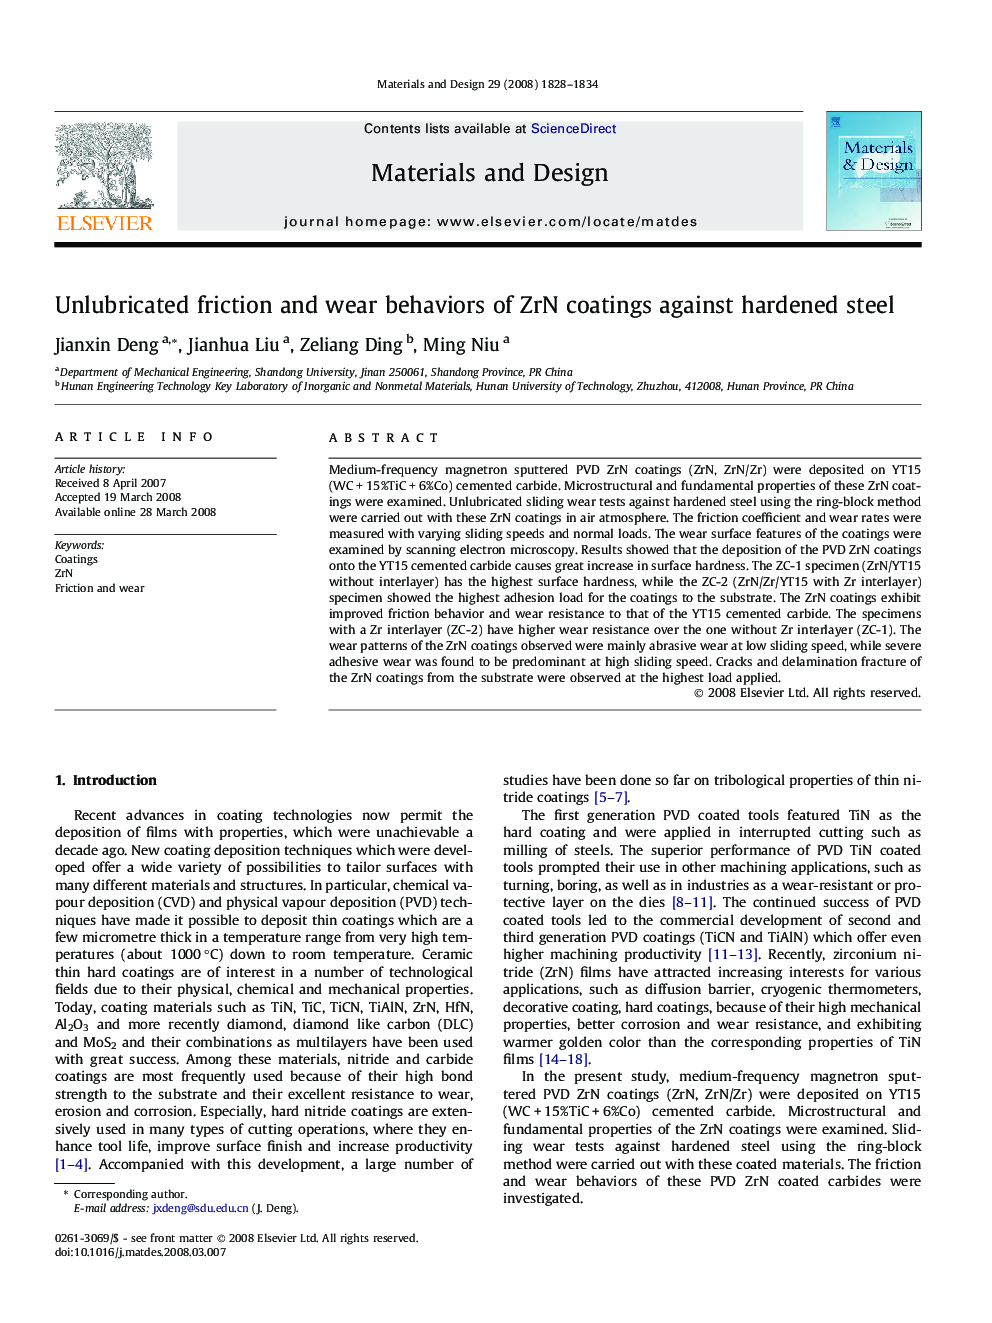 Unlubricated friction and wear behaviors of ZrN coatings against hardened steel